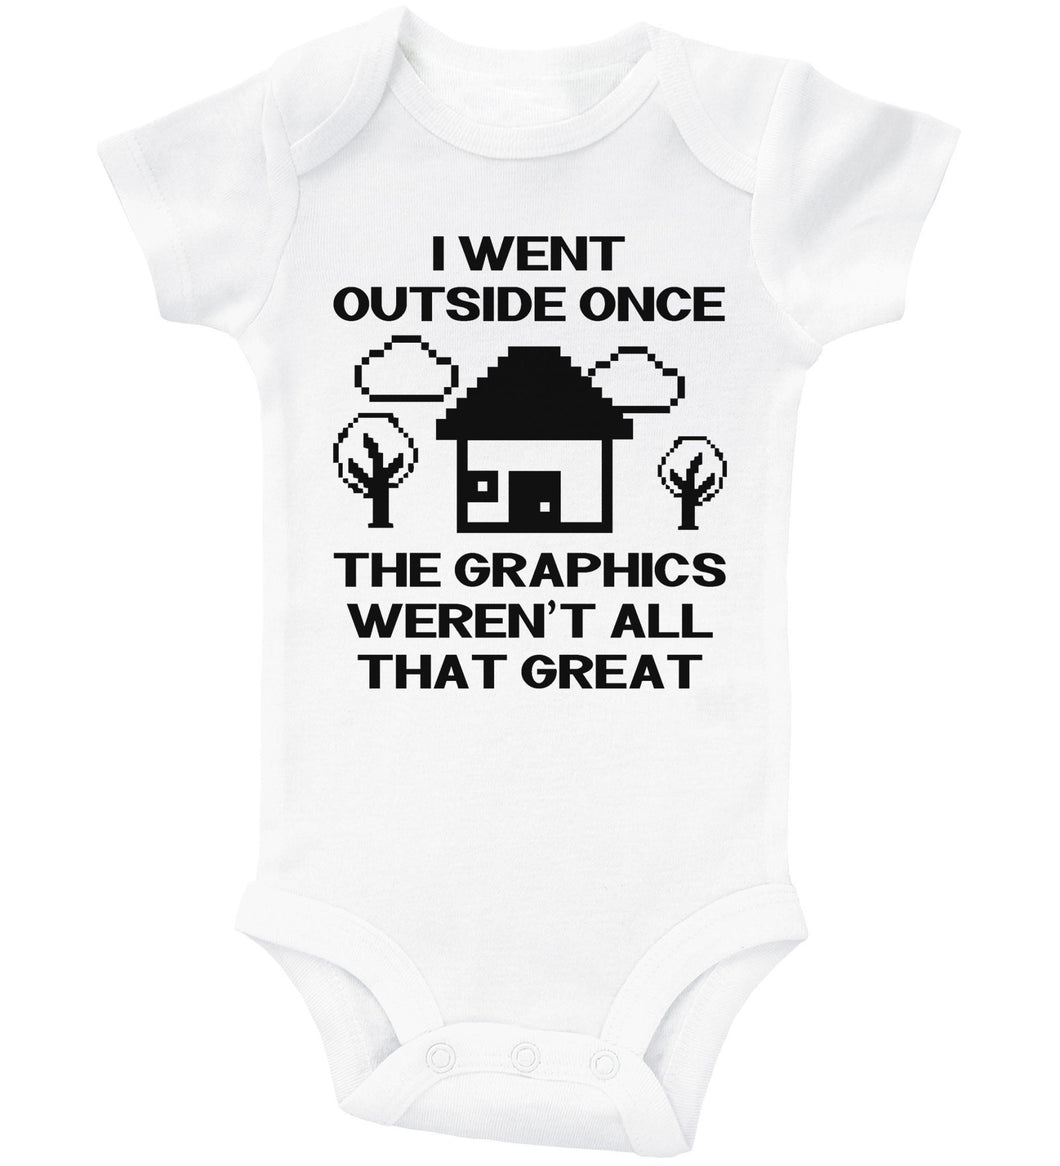 I WENT OUTSIDE ONCE THE GRAPHICS WEREN'T ALL THAT GREAT - Basic Onesie - Baffle